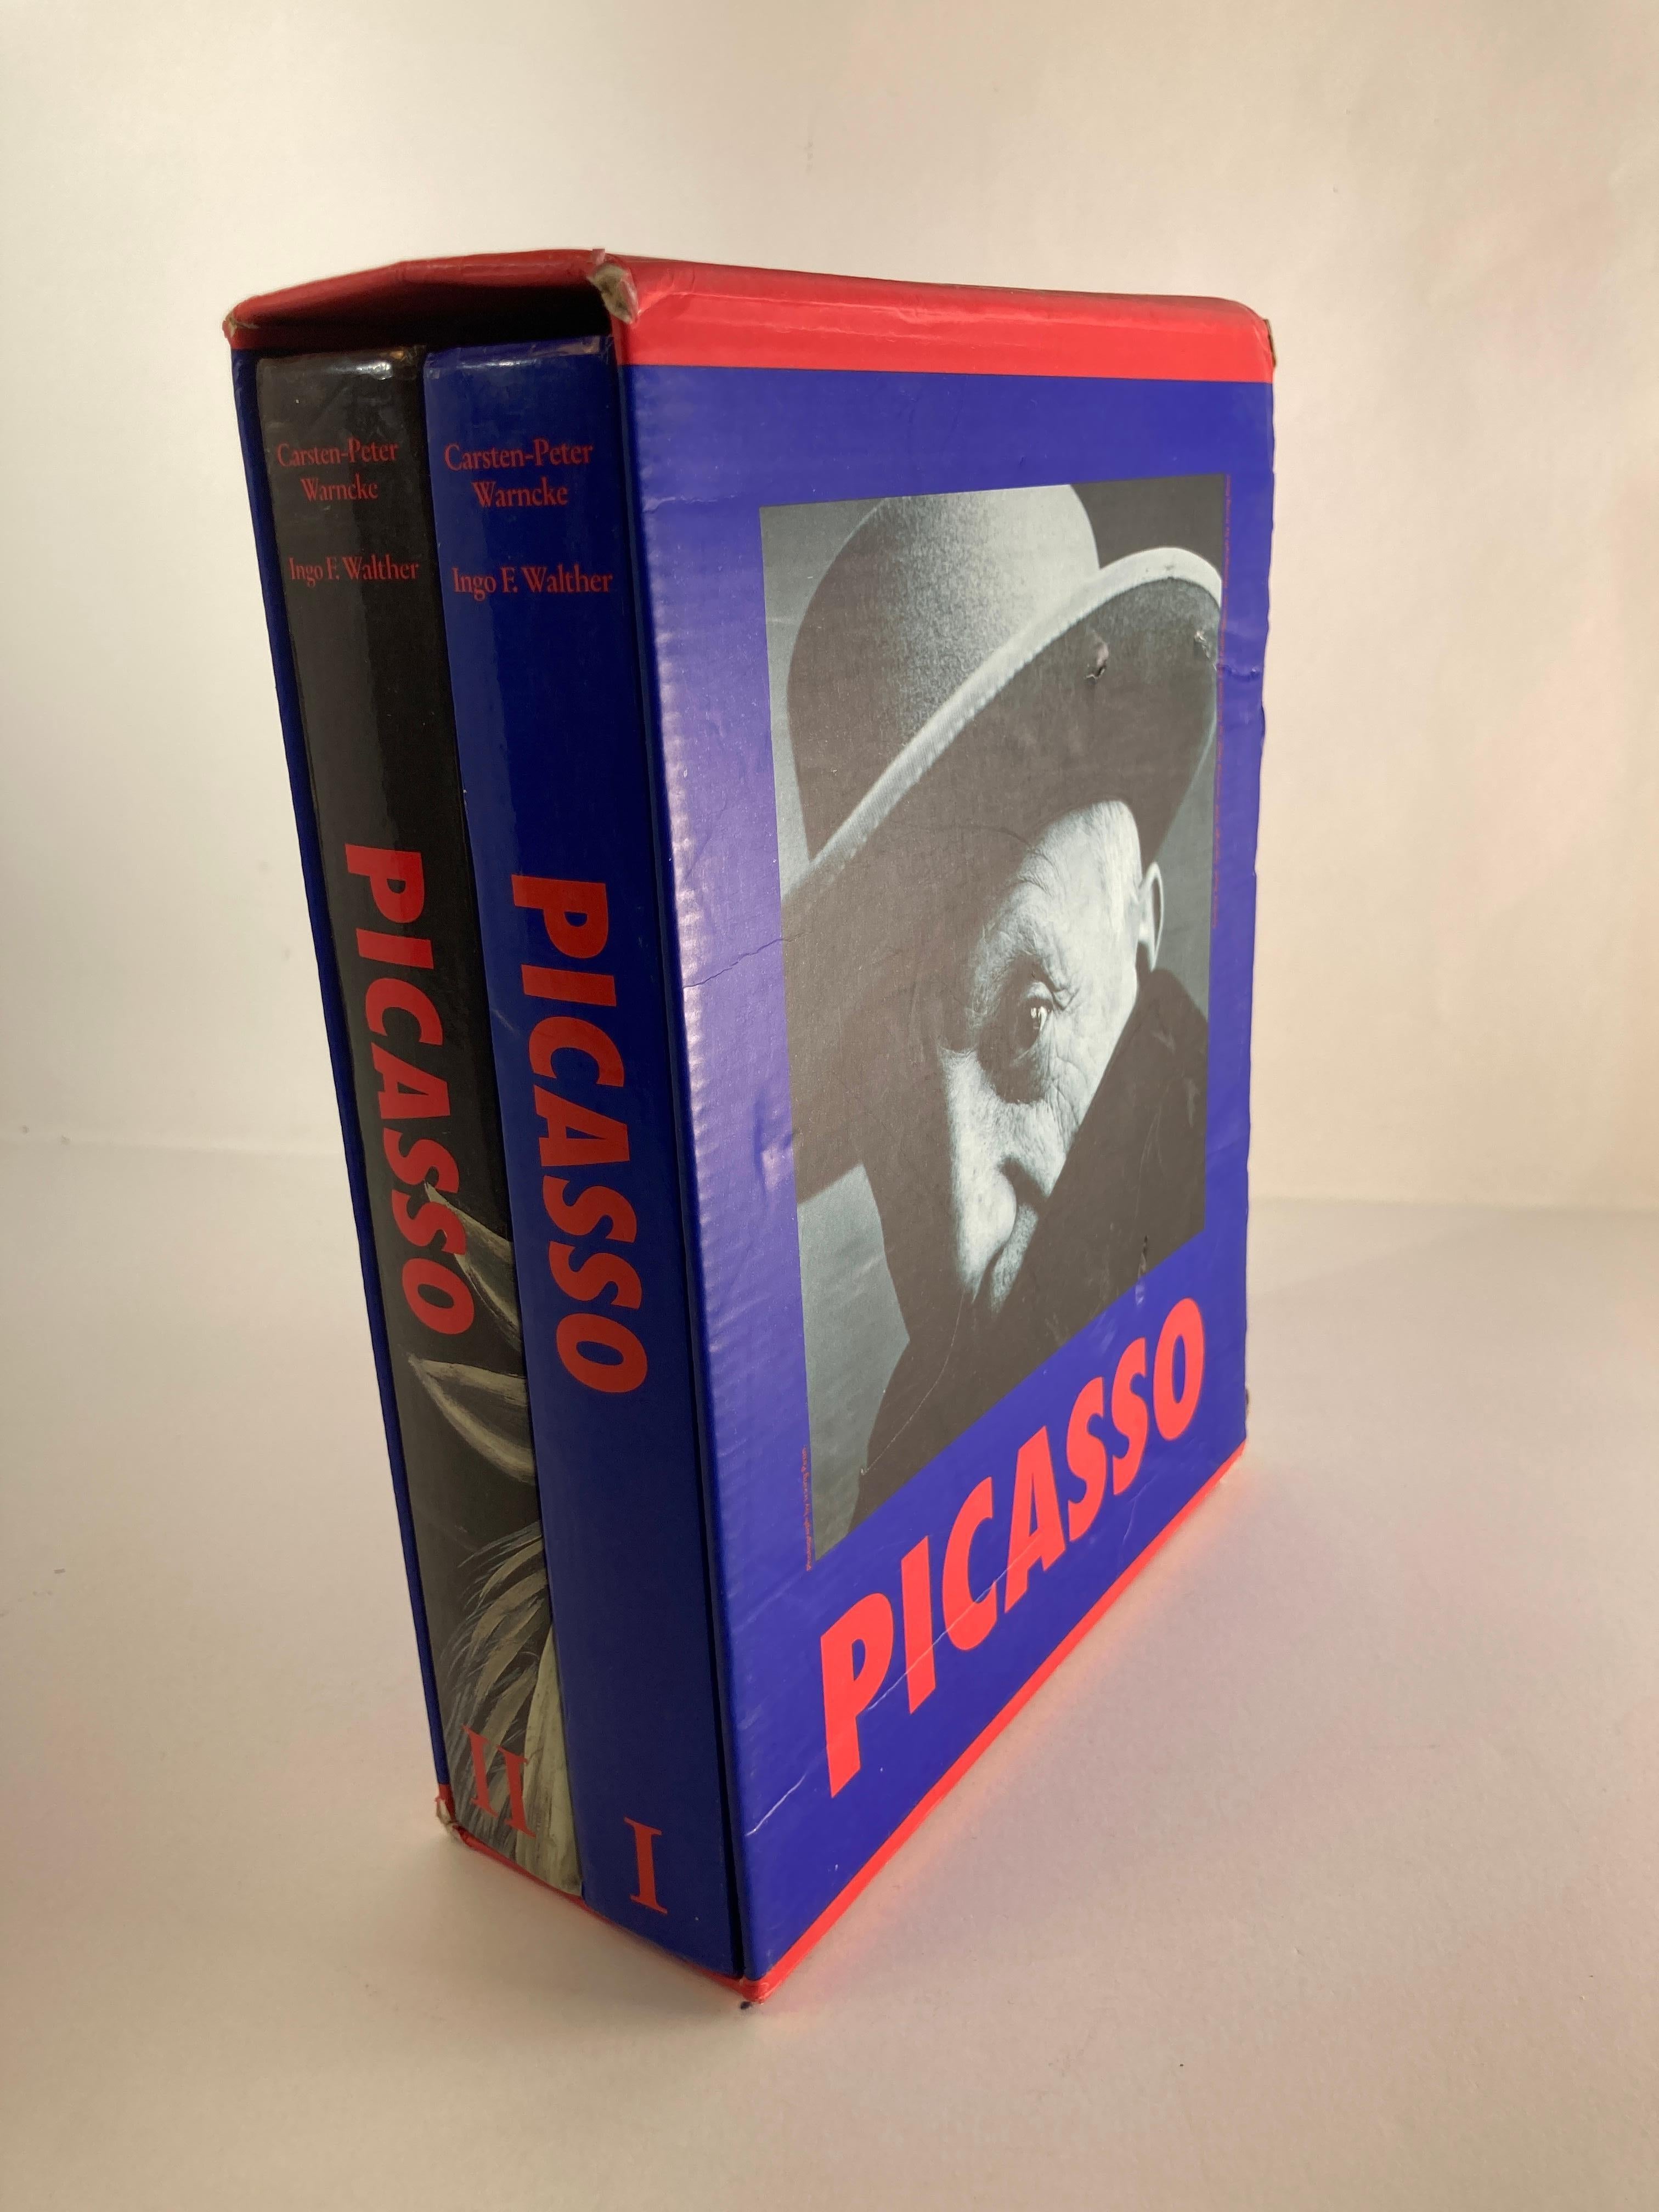 PABLO PICASSO 1881-1973 by Carsten-Peter Warncke; Ingo F. Walther Illustrated by Pablo Picasso Published by Benedikt Taschen.Germany 1995 (Vol I: The Works 1890-1936, pp. 1-380,  Vol II: The Works 1937-1973, pp. 381-740).  2 volumes, large format. 